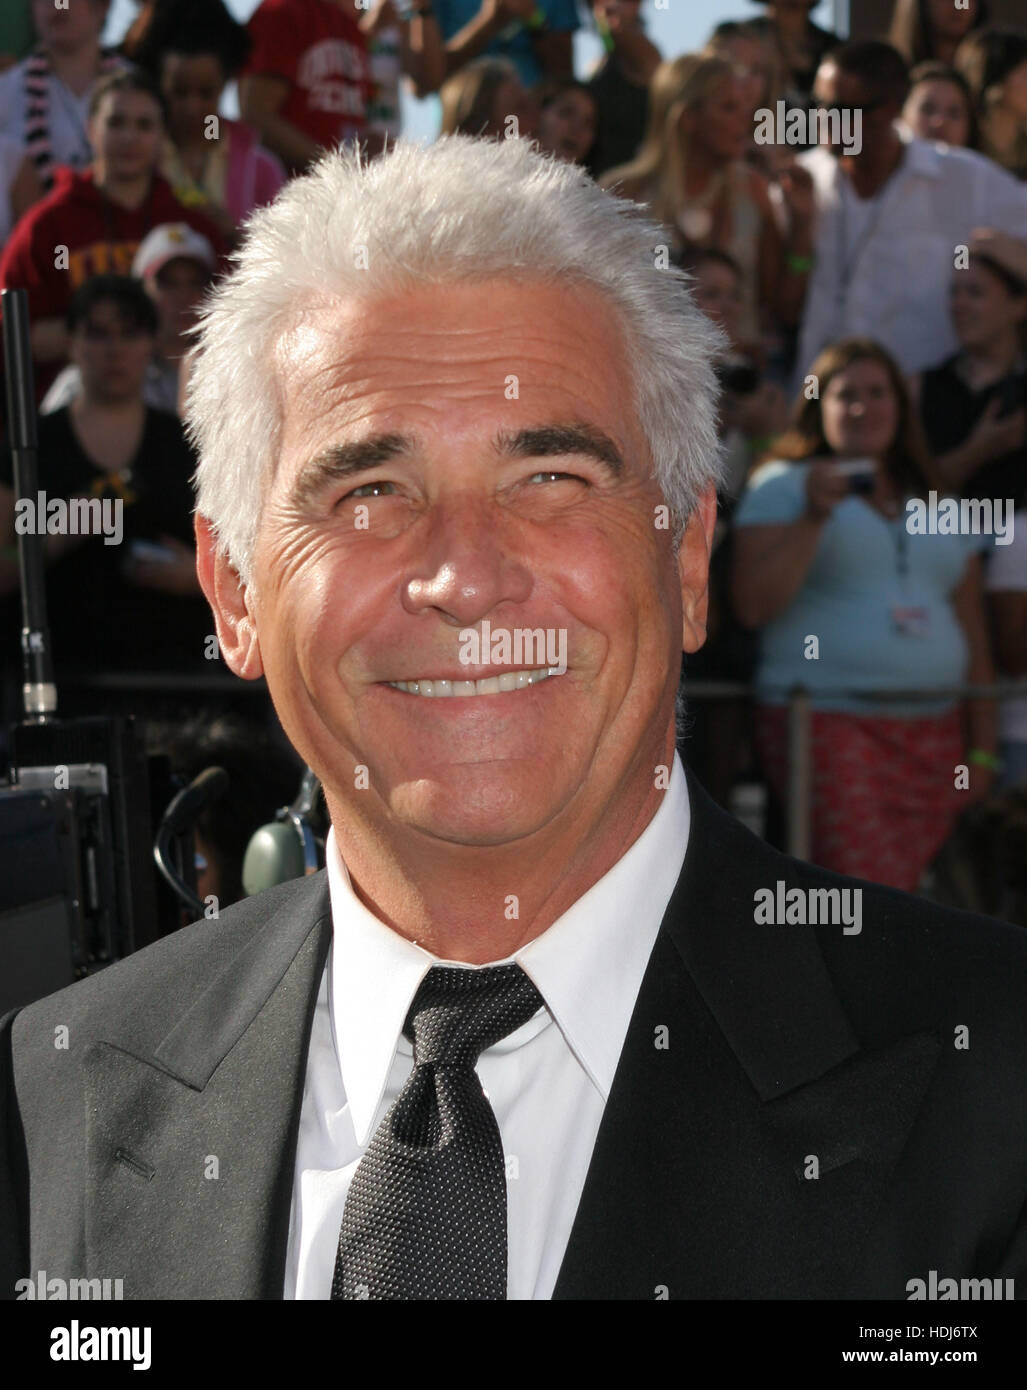 James Brolin at the 56th Annual Emmy Awards  on September 19, 2004 in Los Angeles, California. Photo credit: Francis Specker Stock Photo